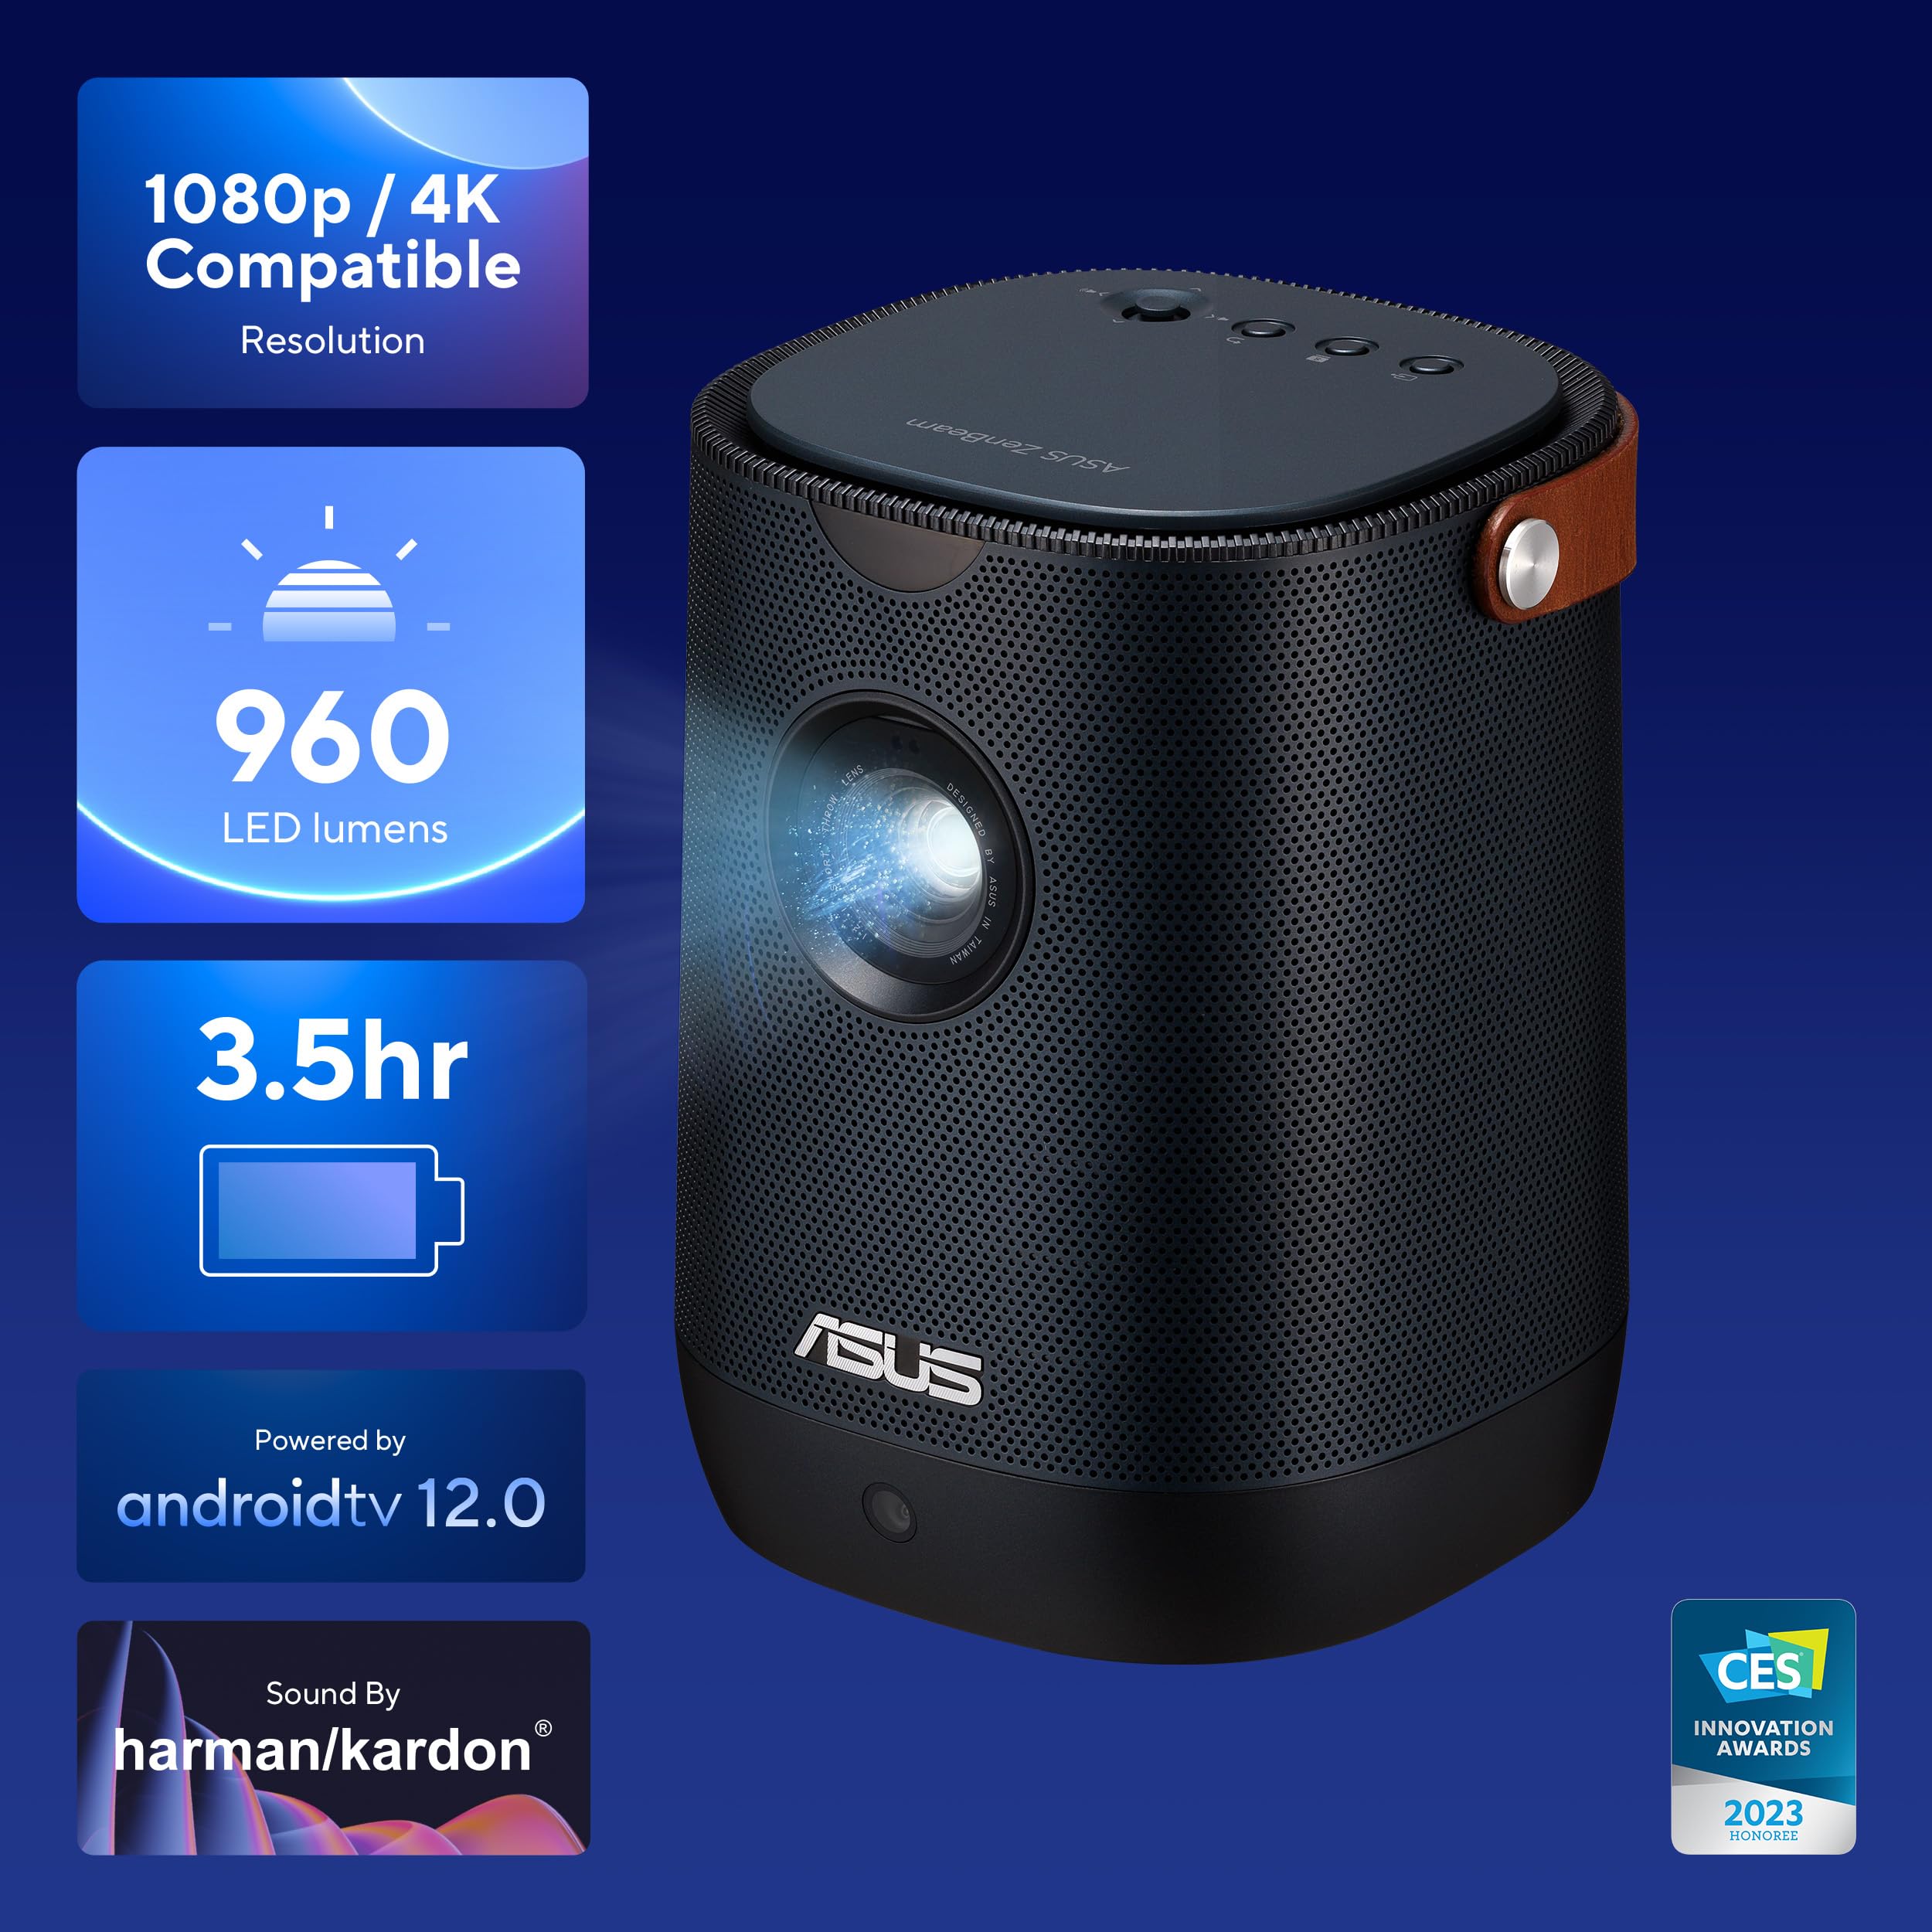 ASUS ZenBeam L2 Smart Portable LED Projector - 960 LED Lumens, 1080P, Chromecast, 10W Bluetooth Speaker, Built-in battery, 3.5 hour Video Playback, Wireless Projection, ASUS Light Wall, Android TV Box